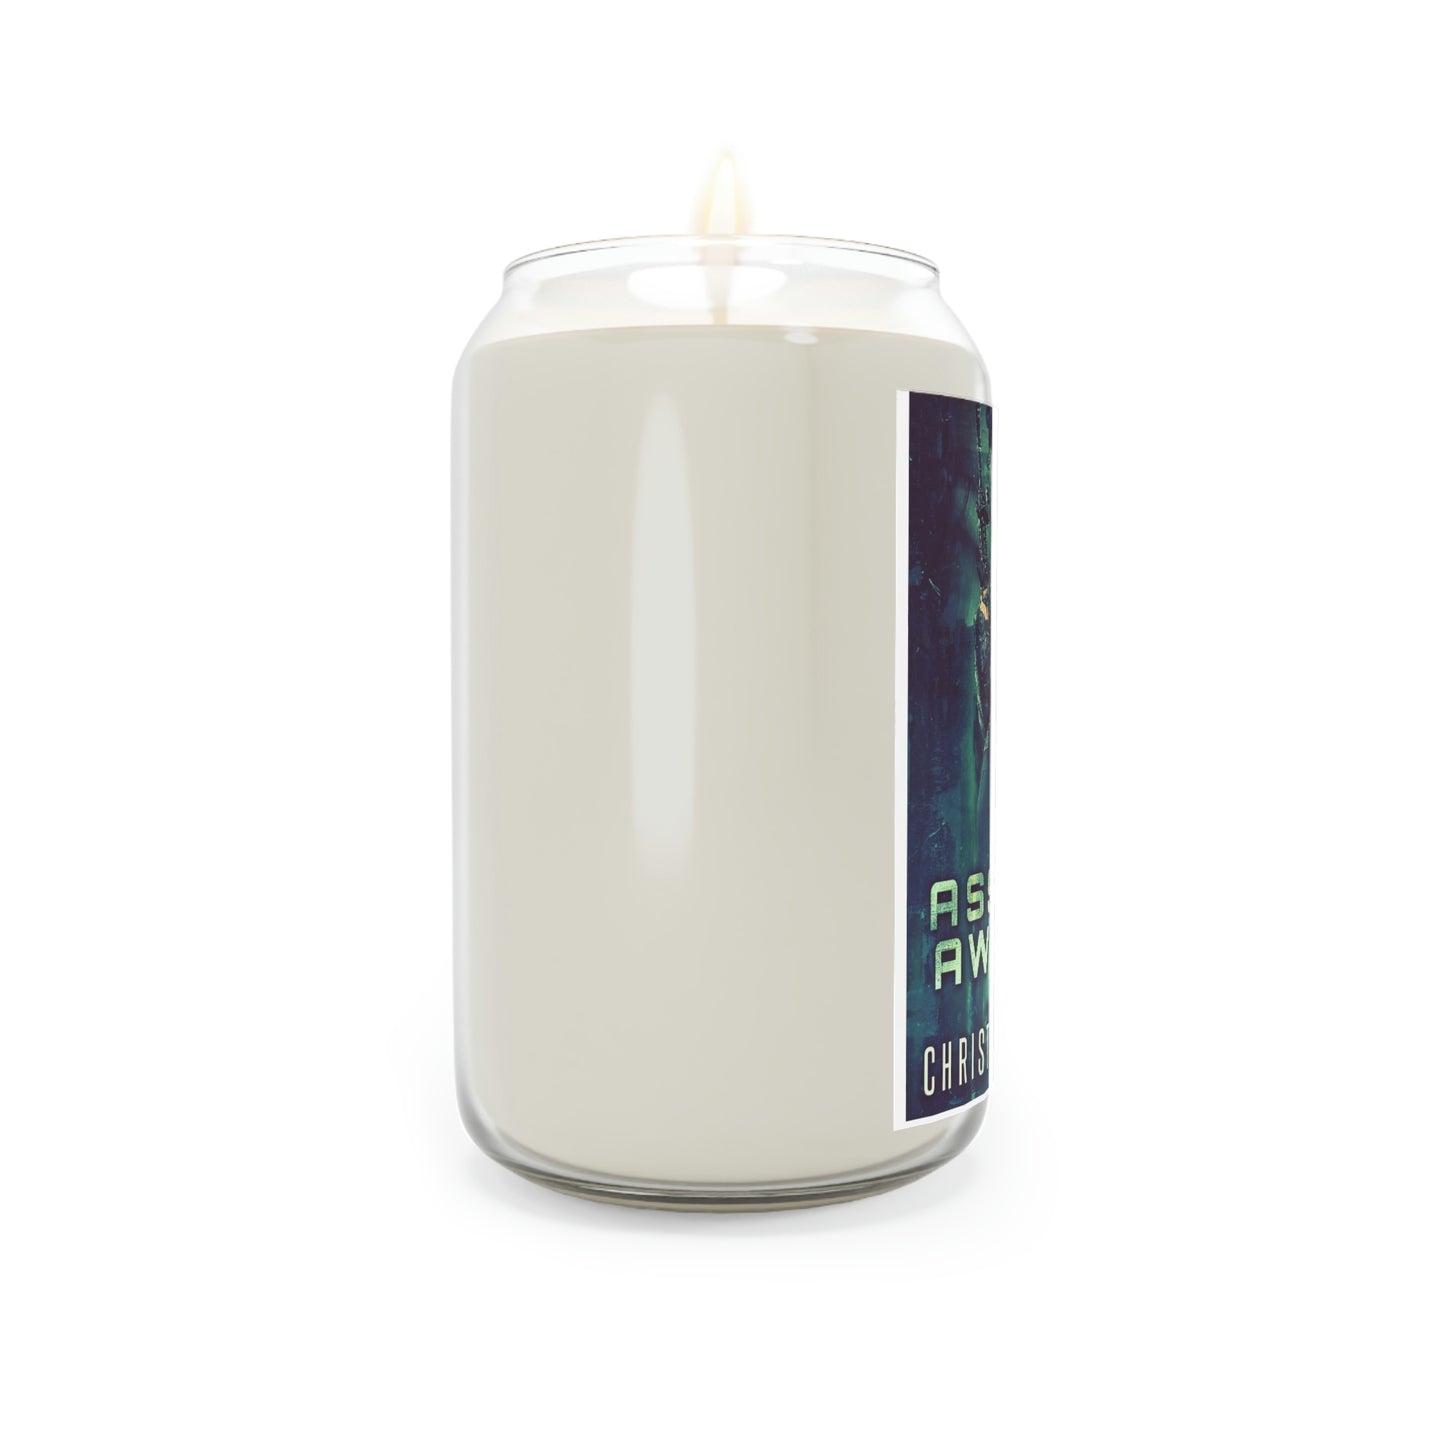 The Assassin Awakens - Scented Candle